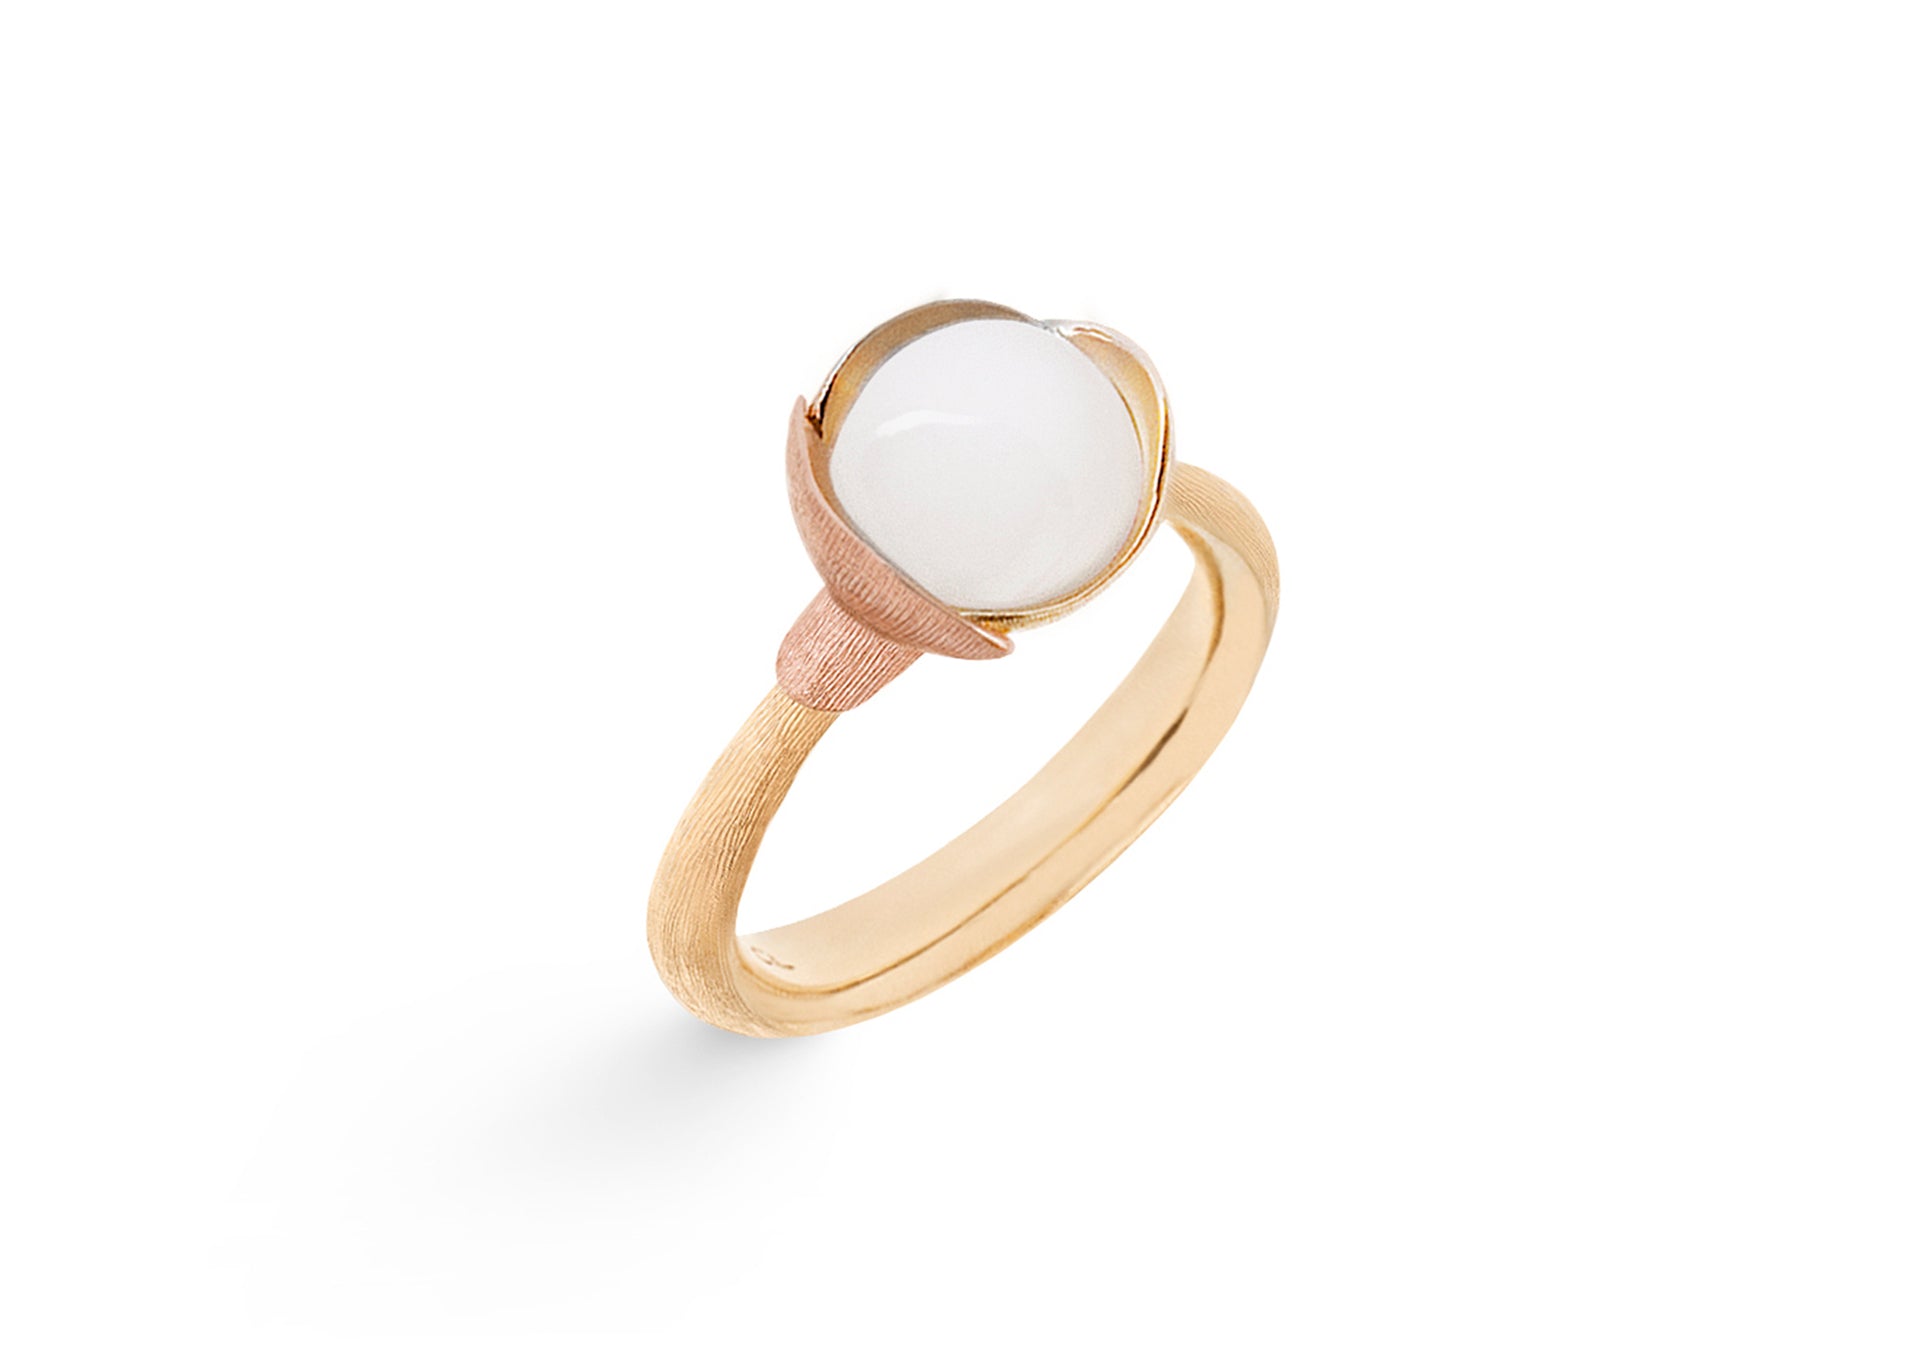 Lotus Ring in 18ct Yellow Gold with White Moonstone